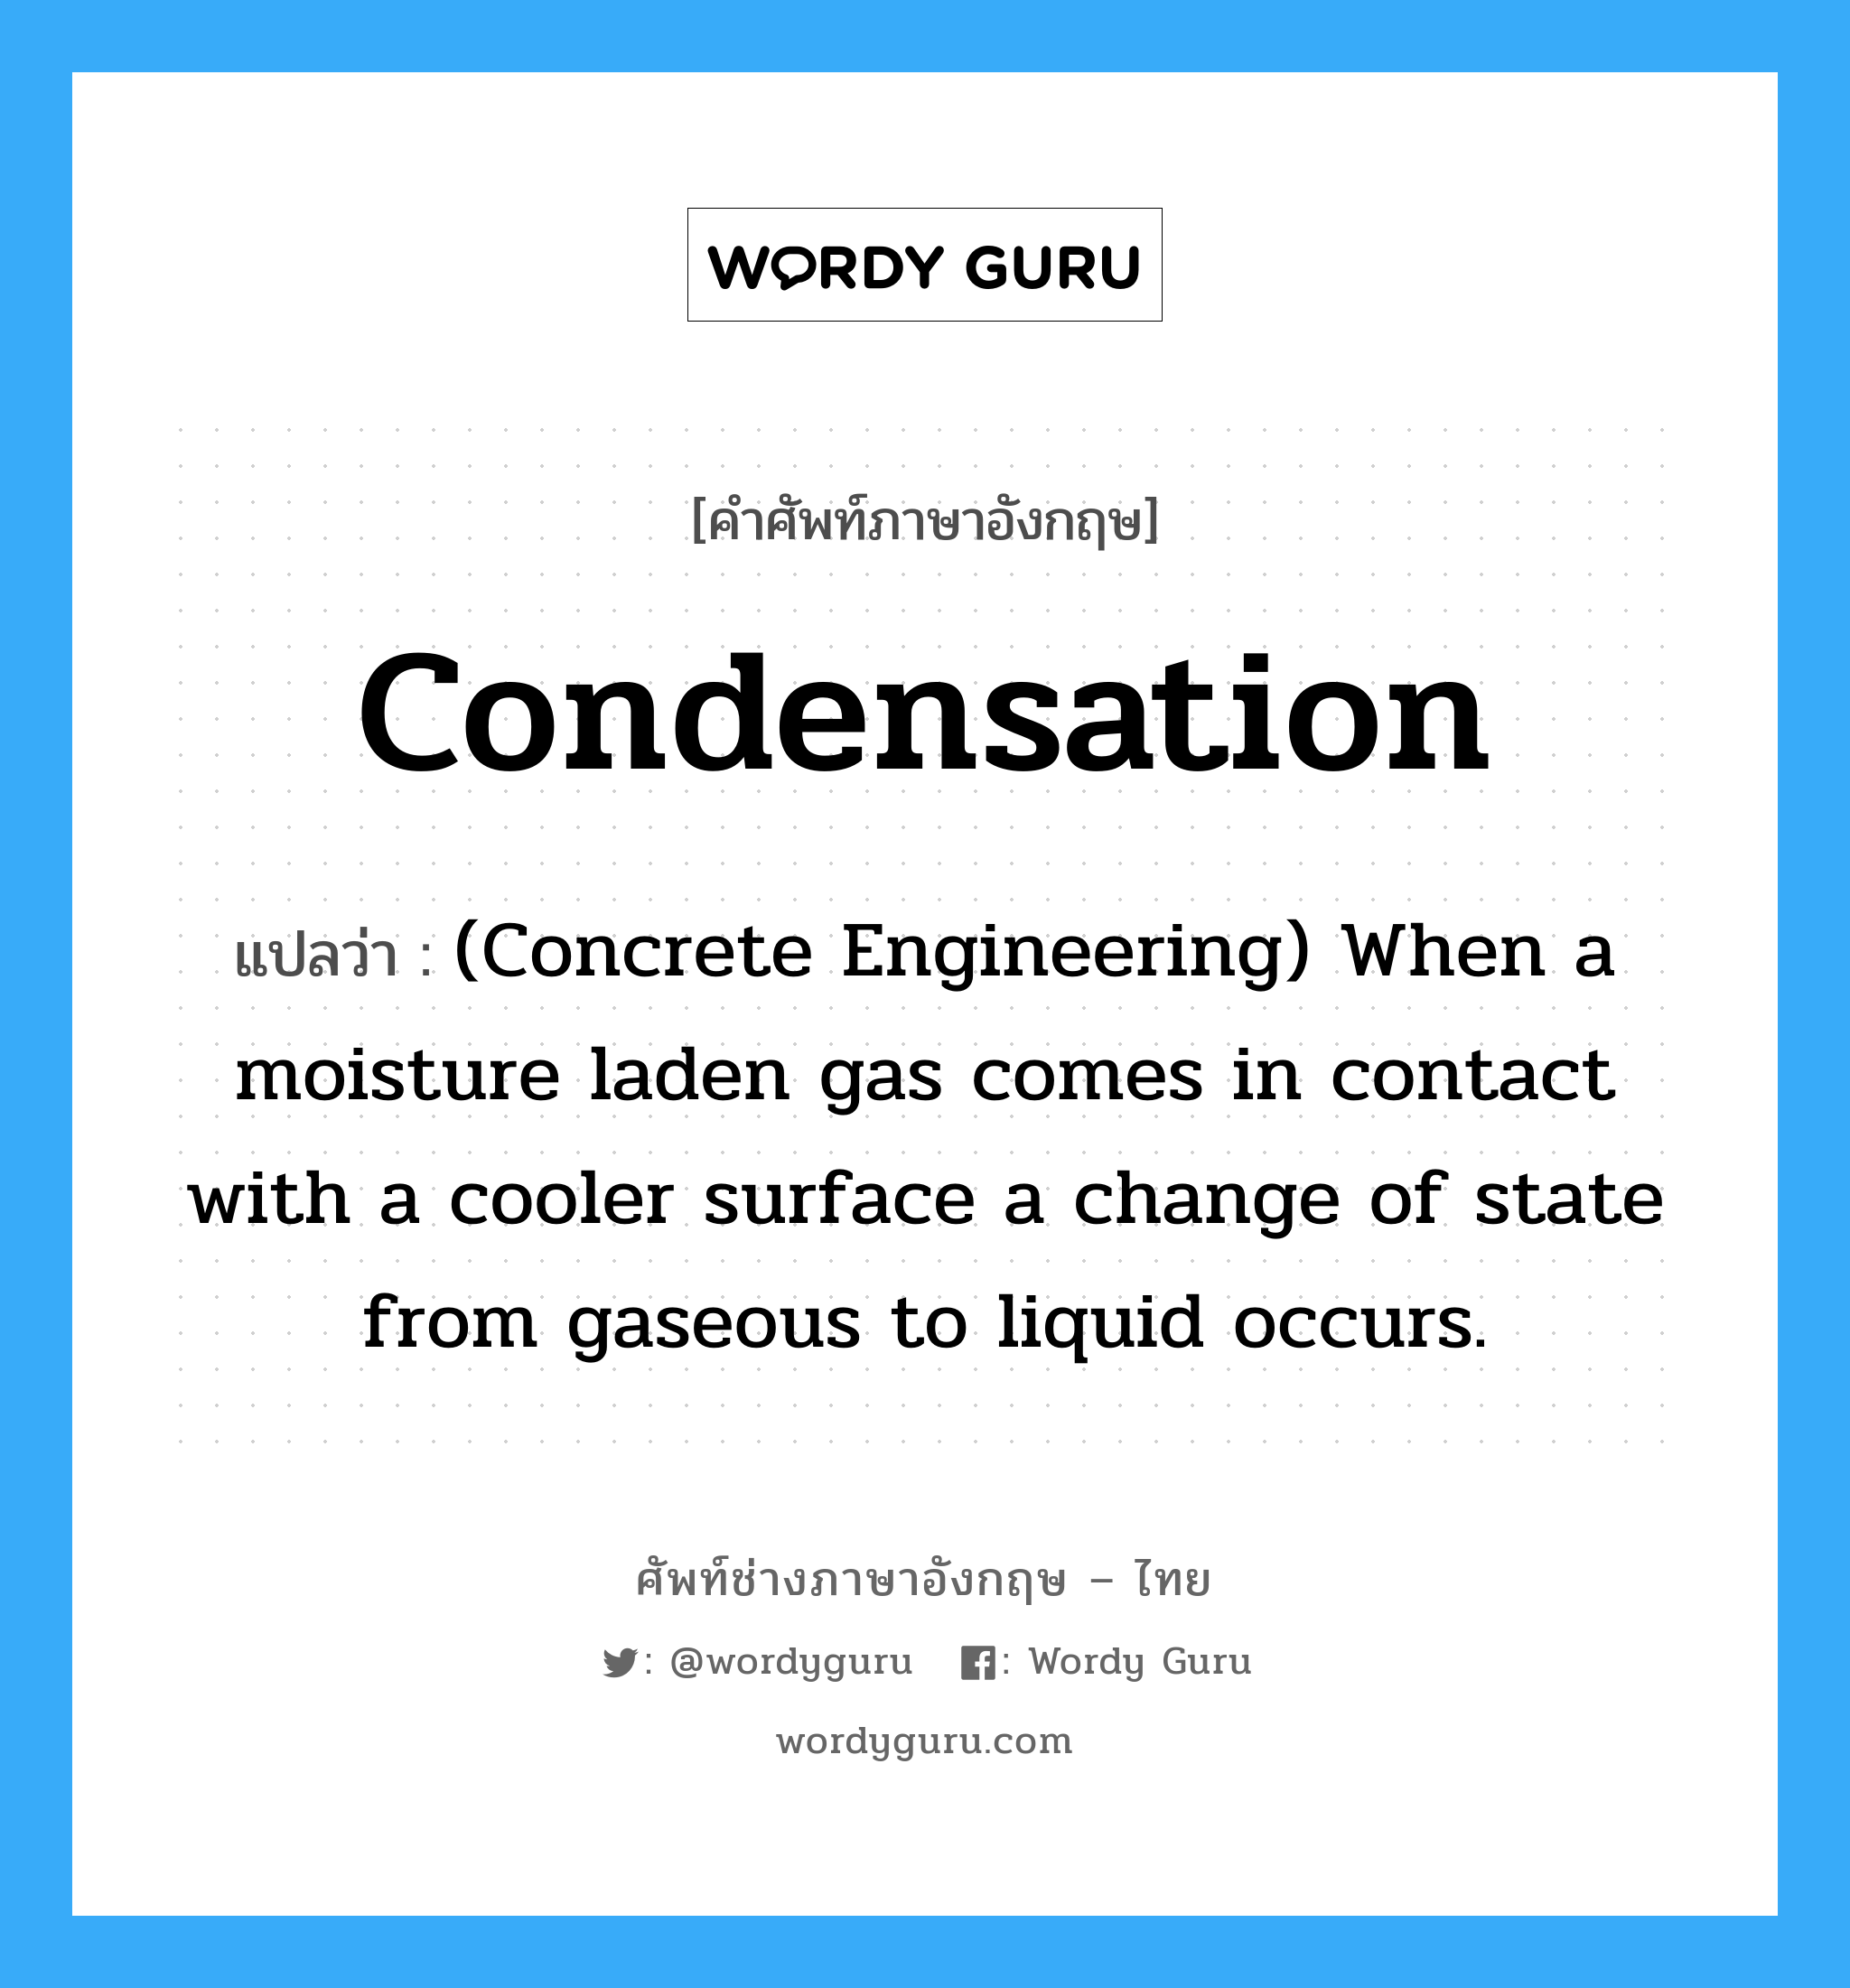 (Concrete Engineering) When a moisture laden gas comes in contact with a cooler surface a change of state from gaseous to liquid occurs. ภาษาอังกฤษ?, คำศัพท์ช่างภาษาอังกฤษ - ไทย (Concrete Engineering) When a moisture laden gas comes in contact with a cooler surface a change of state from gaseous to liquid occurs. คำศัพท์ภาษาอังกฤษ (Concrete Engineering) When a moisture laden gas comes in contact with a cooler surface a change of state from gaseous to liquid occurs. แปลว่า Condensation